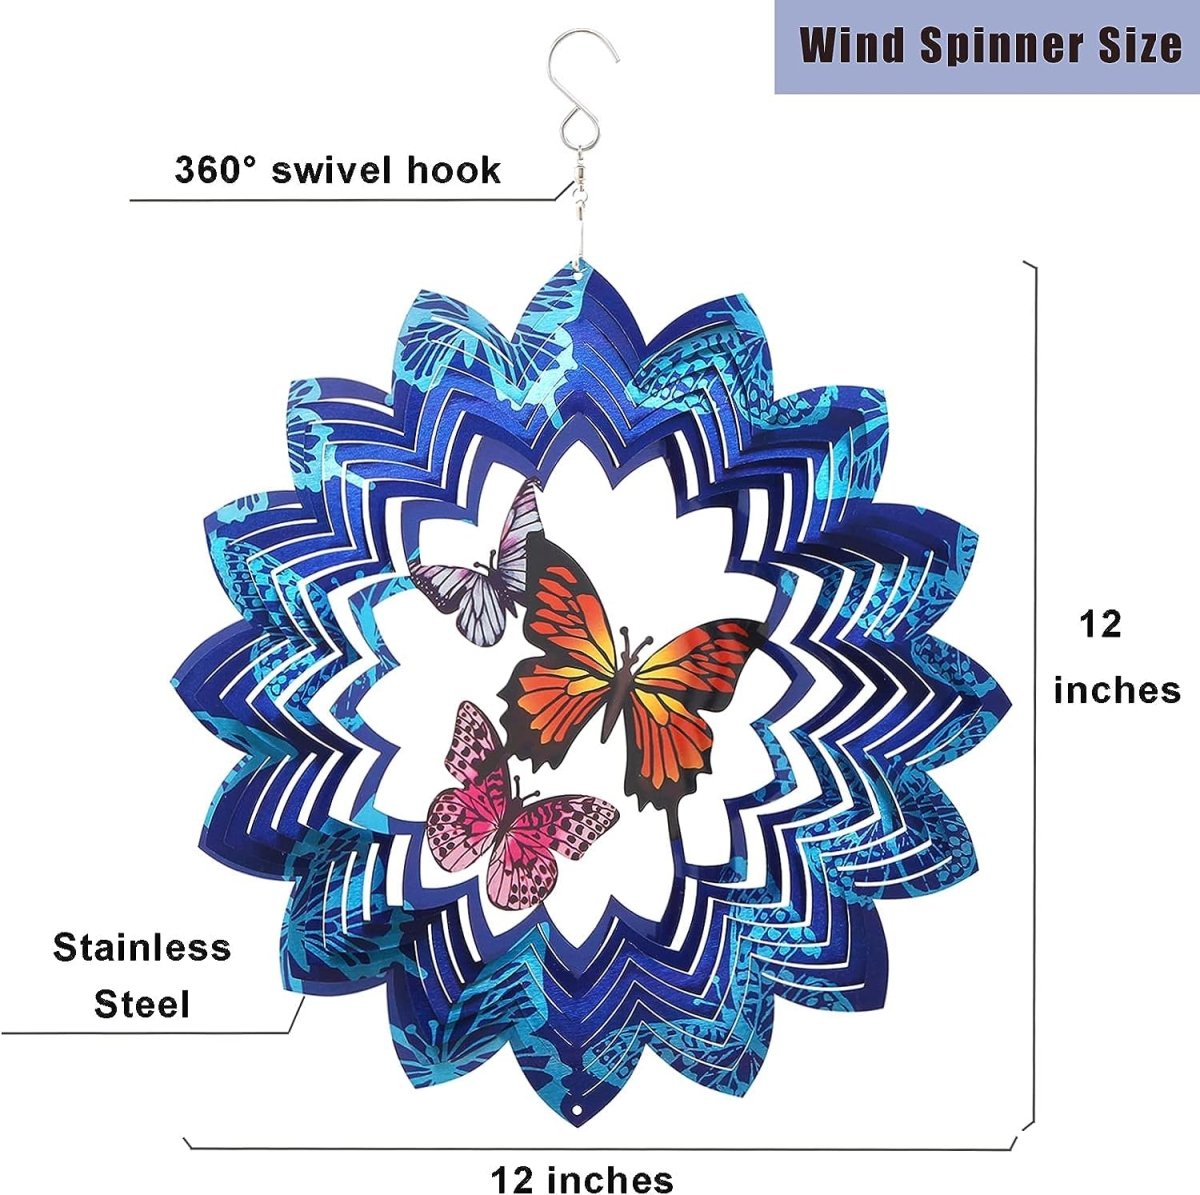 3D Hanging Wind Spinner for Outdoor Decorations- Butterfly Wind Spinner- #Royalkart#3d wall hanging